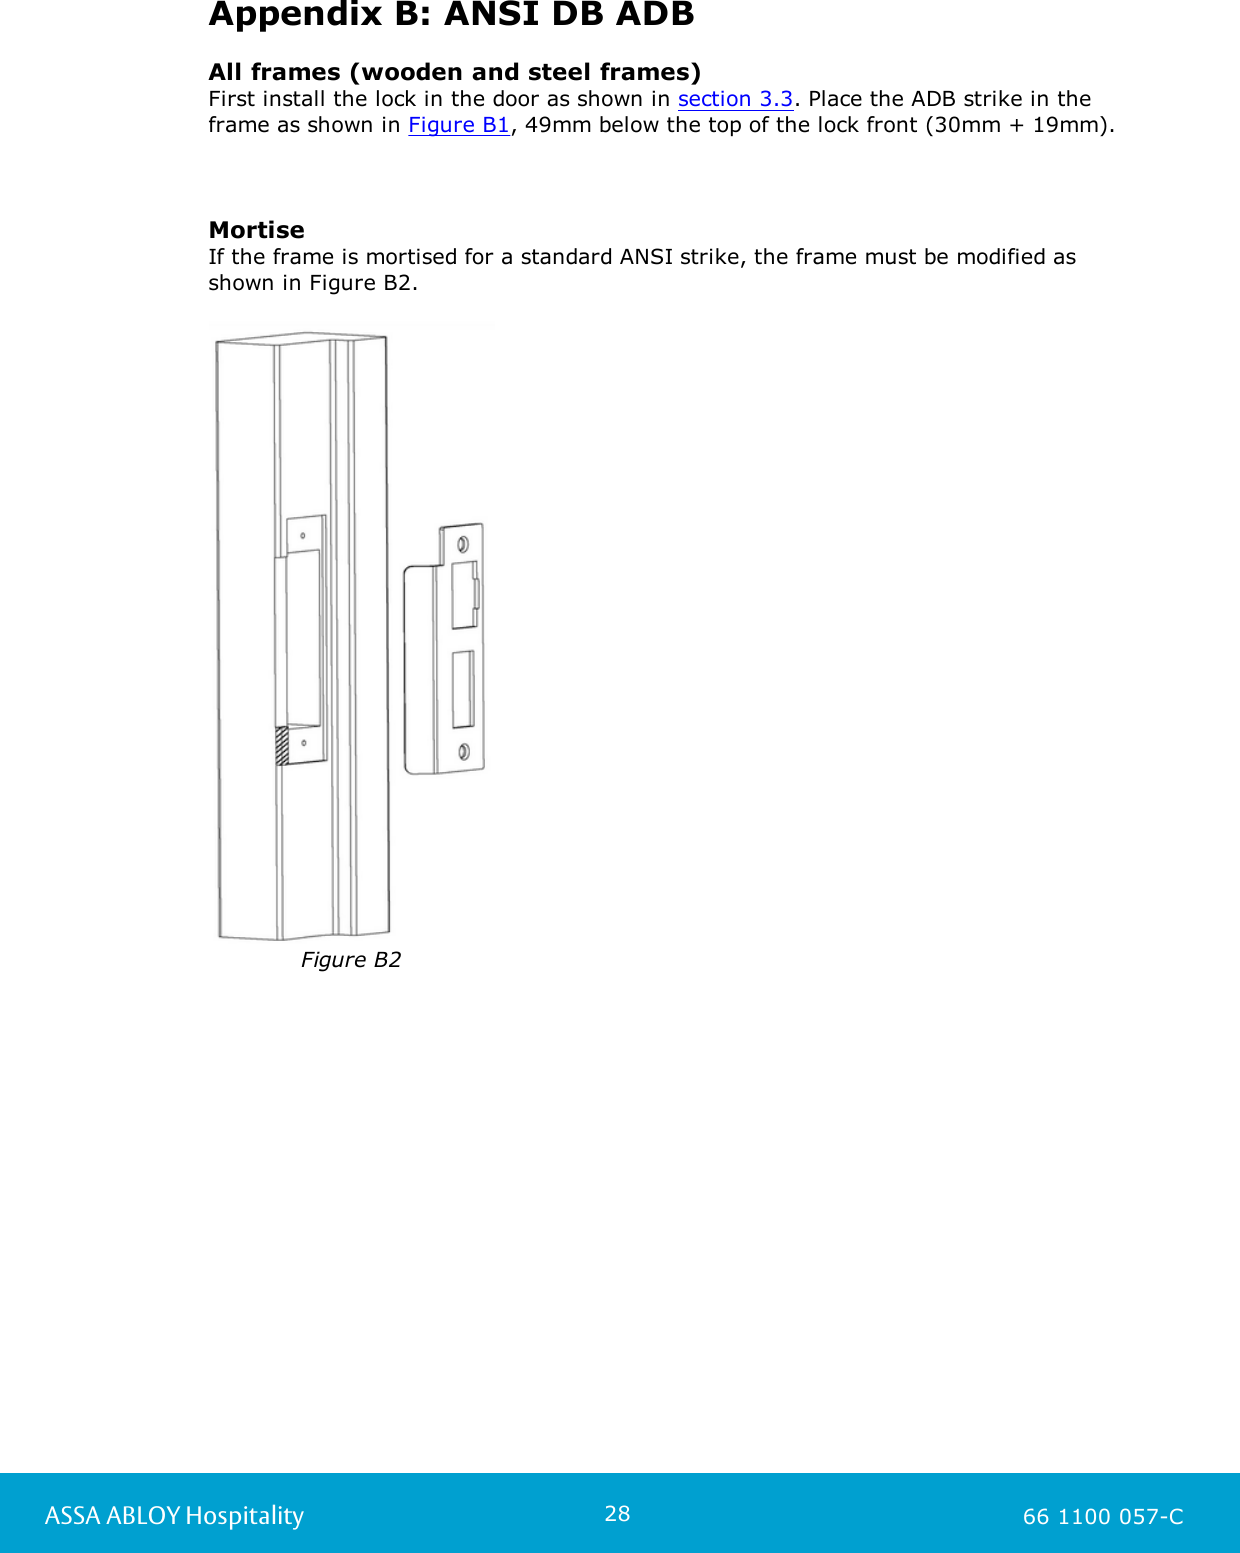 28ASSA ABLOY Hospitality 66 1100 057-CAppendix B: ANSI DB ADBAll frames (wooden and steel frames)First install the lock in the door as shown in section 3.3. Place the ADB strike in theframe as shown in Figure B1, 49mm below the top of the lock front (30mm + 19mm).MortiseIf the frame is mortised for a standard ANSI strike, the frame must be modified asshown in Figure B2.Figure B2